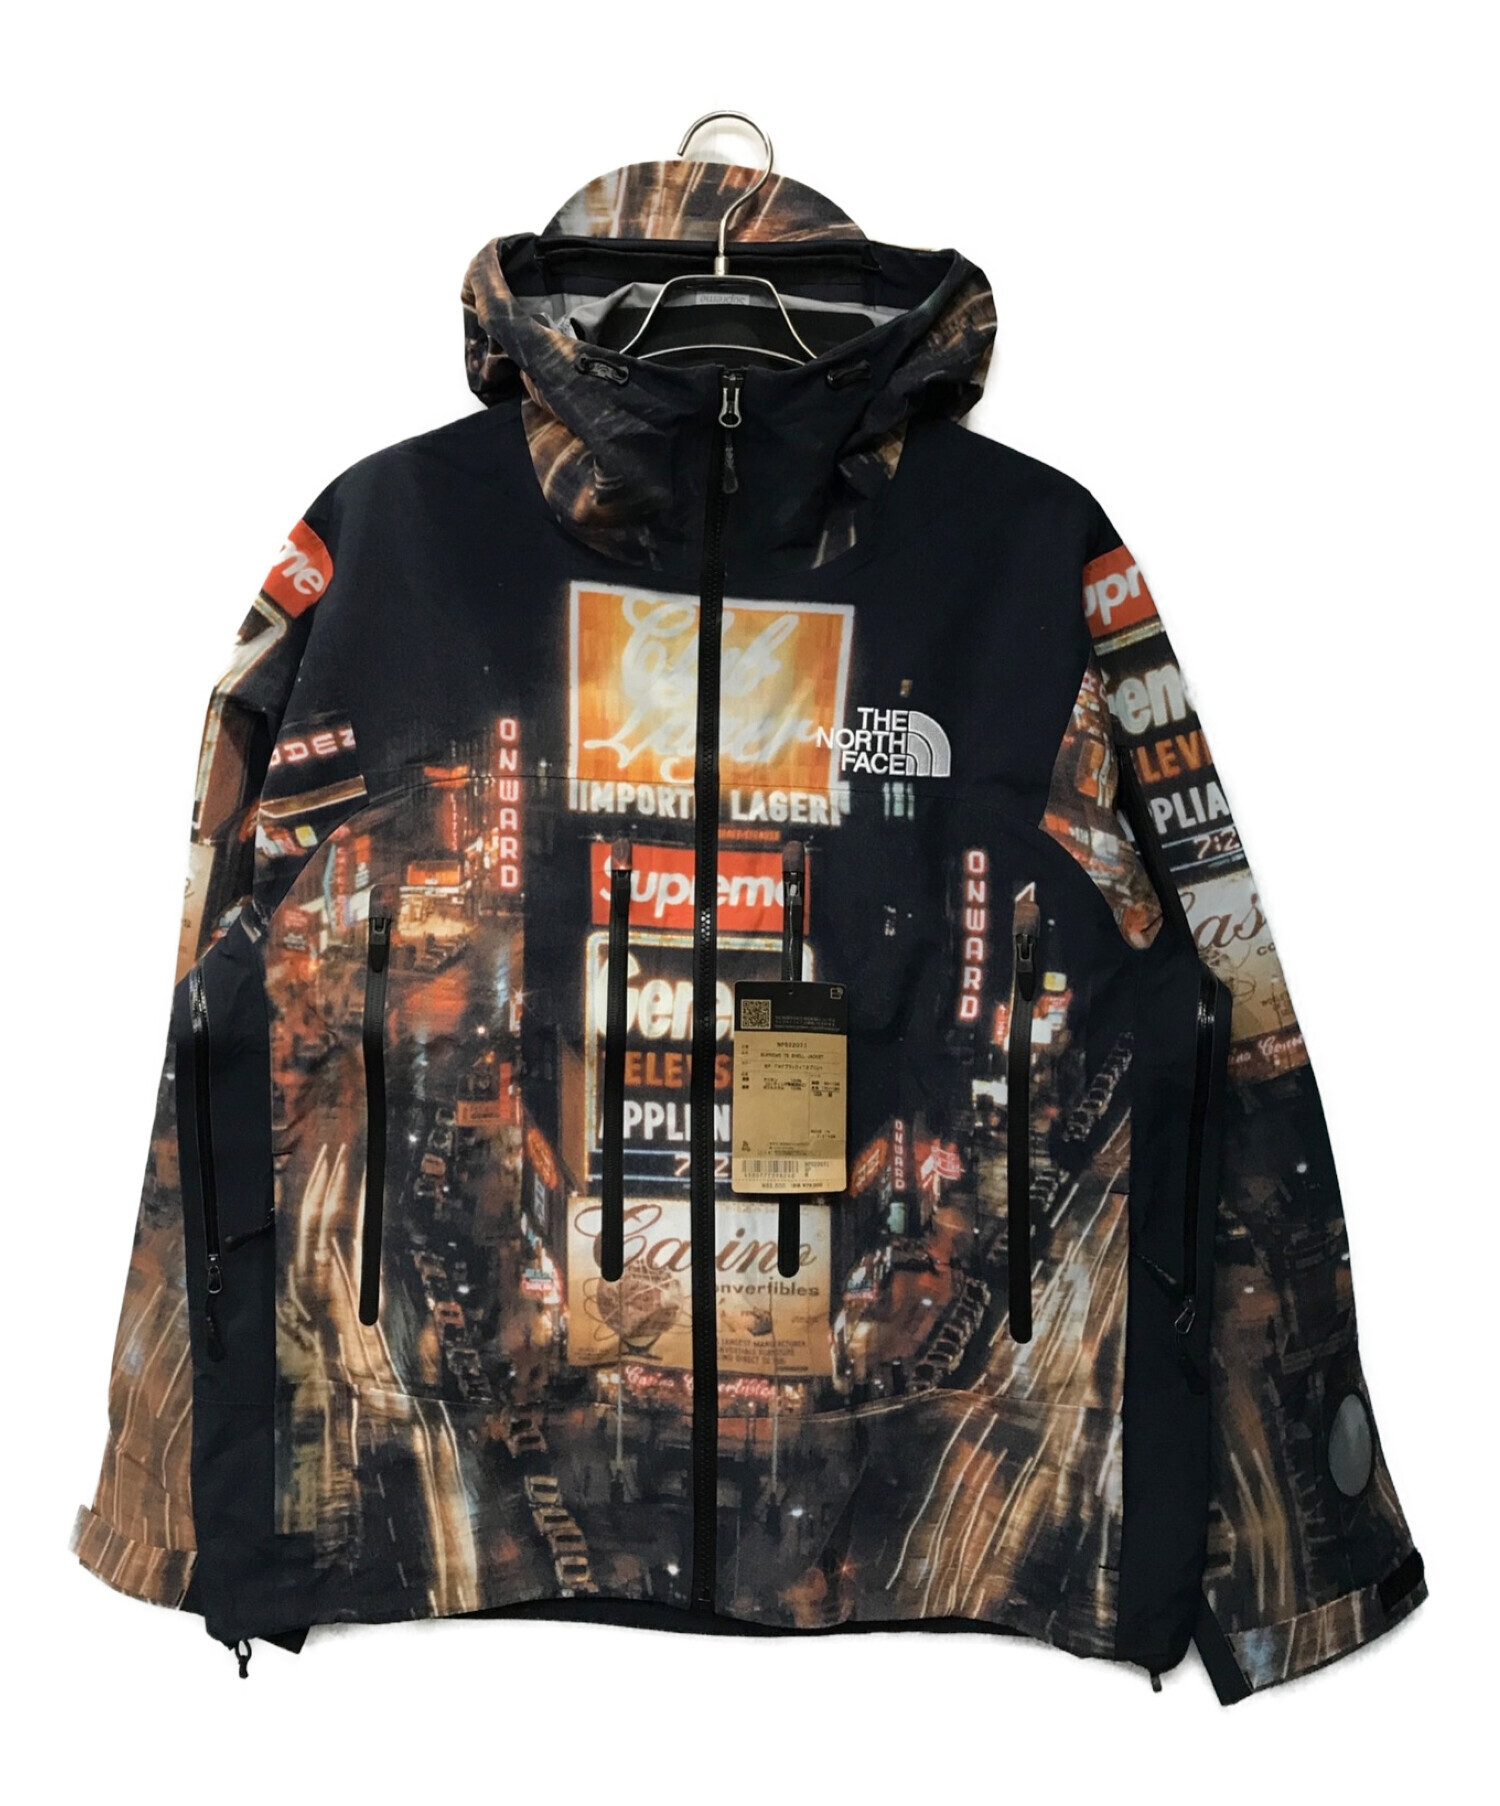 S SUPREME THE NORTH FACE JACKET ジャケット2